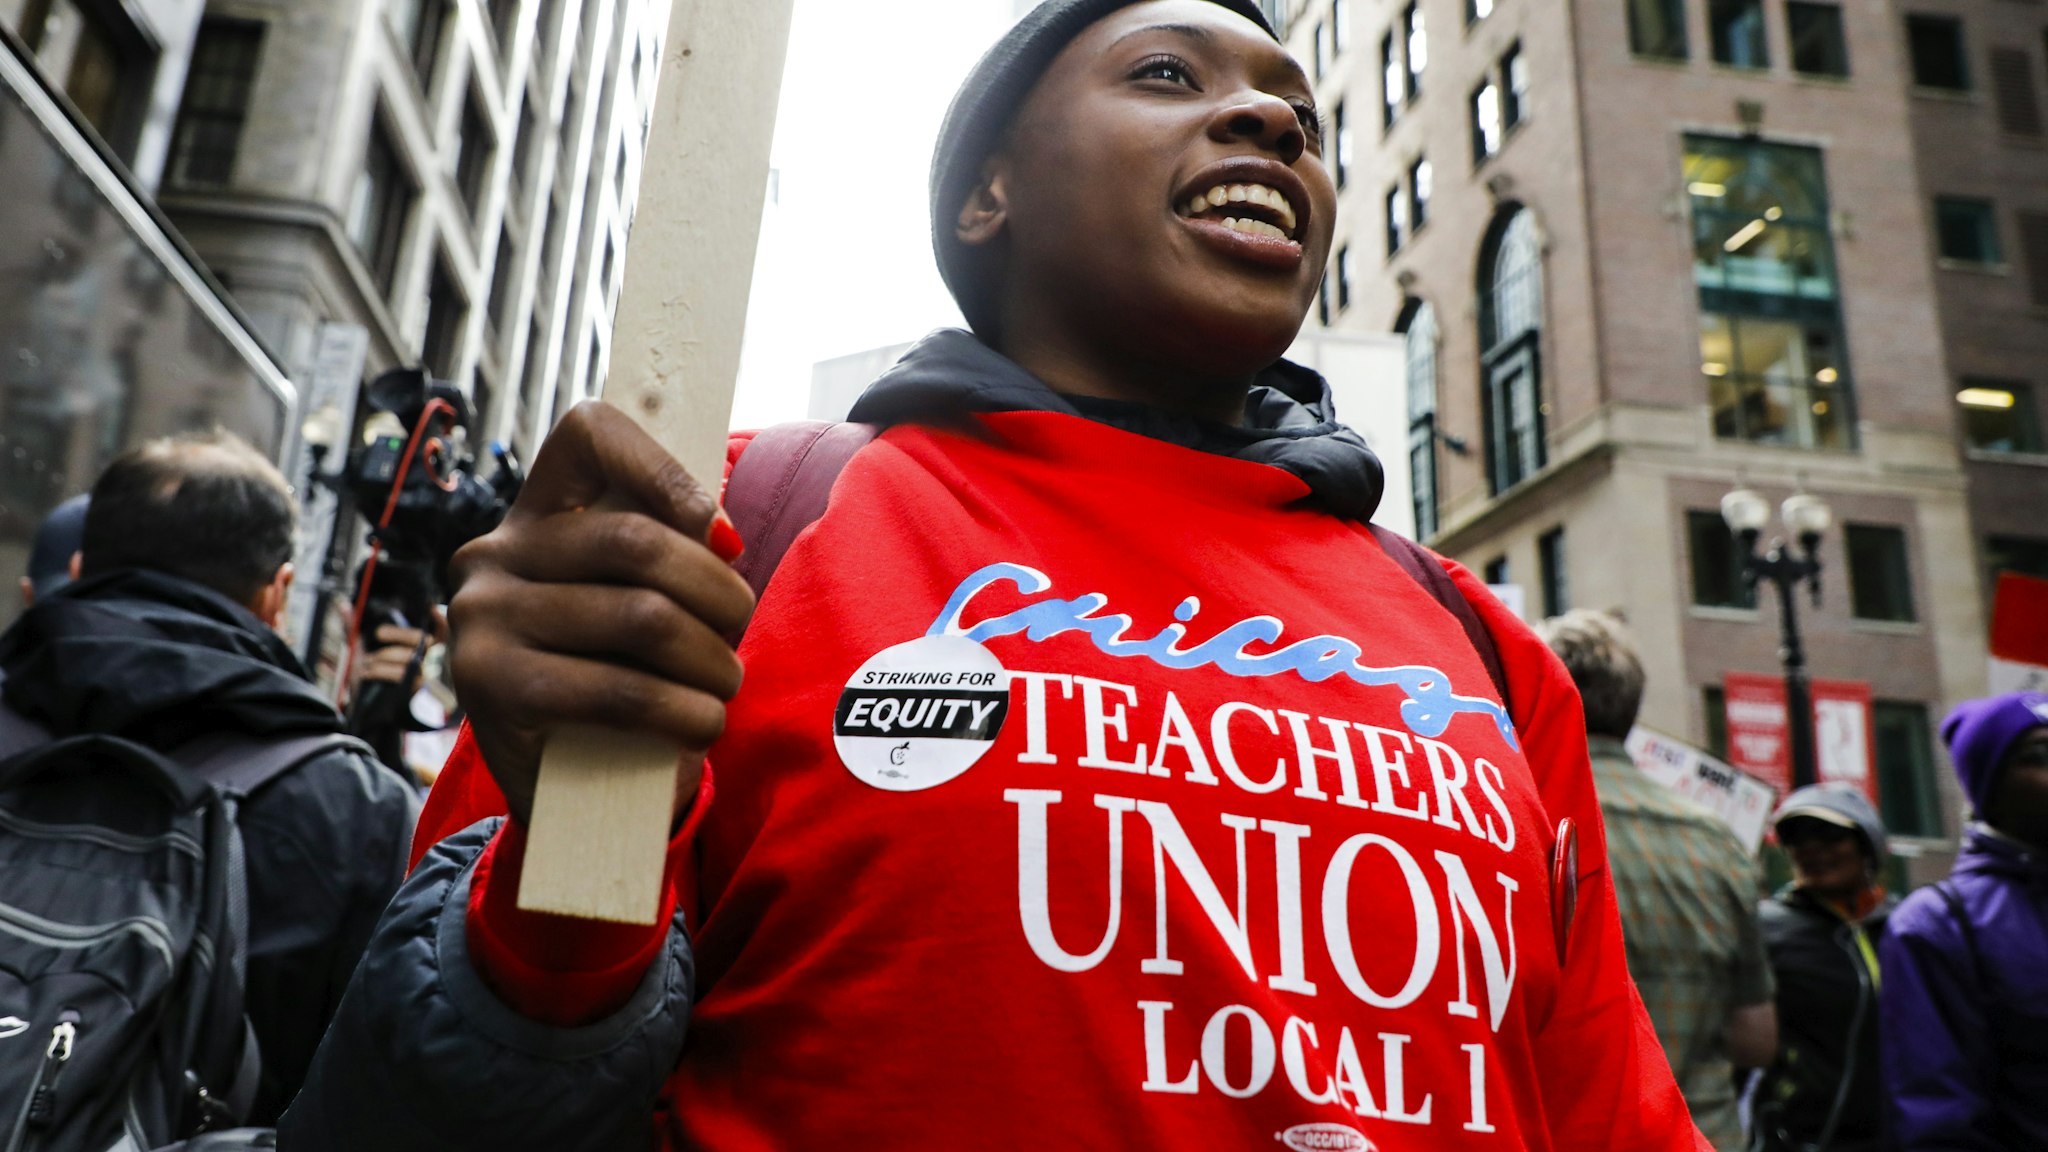 TCHICAGO, Oct. 17, 2019 -- A teacher takes part in the Chicago Teachers' Union strike rally in downtown Chicago, the United States, on Oct. 17, 2019. Thousands of teachers and supporters rally on Thursday after Chicago Teachers' Union failed to make a deal with the municipal government on raising the teachers' salaries. (Photo by Joel Lerner/Xinhua via Getty) (Xinhua/ via Getty Images)